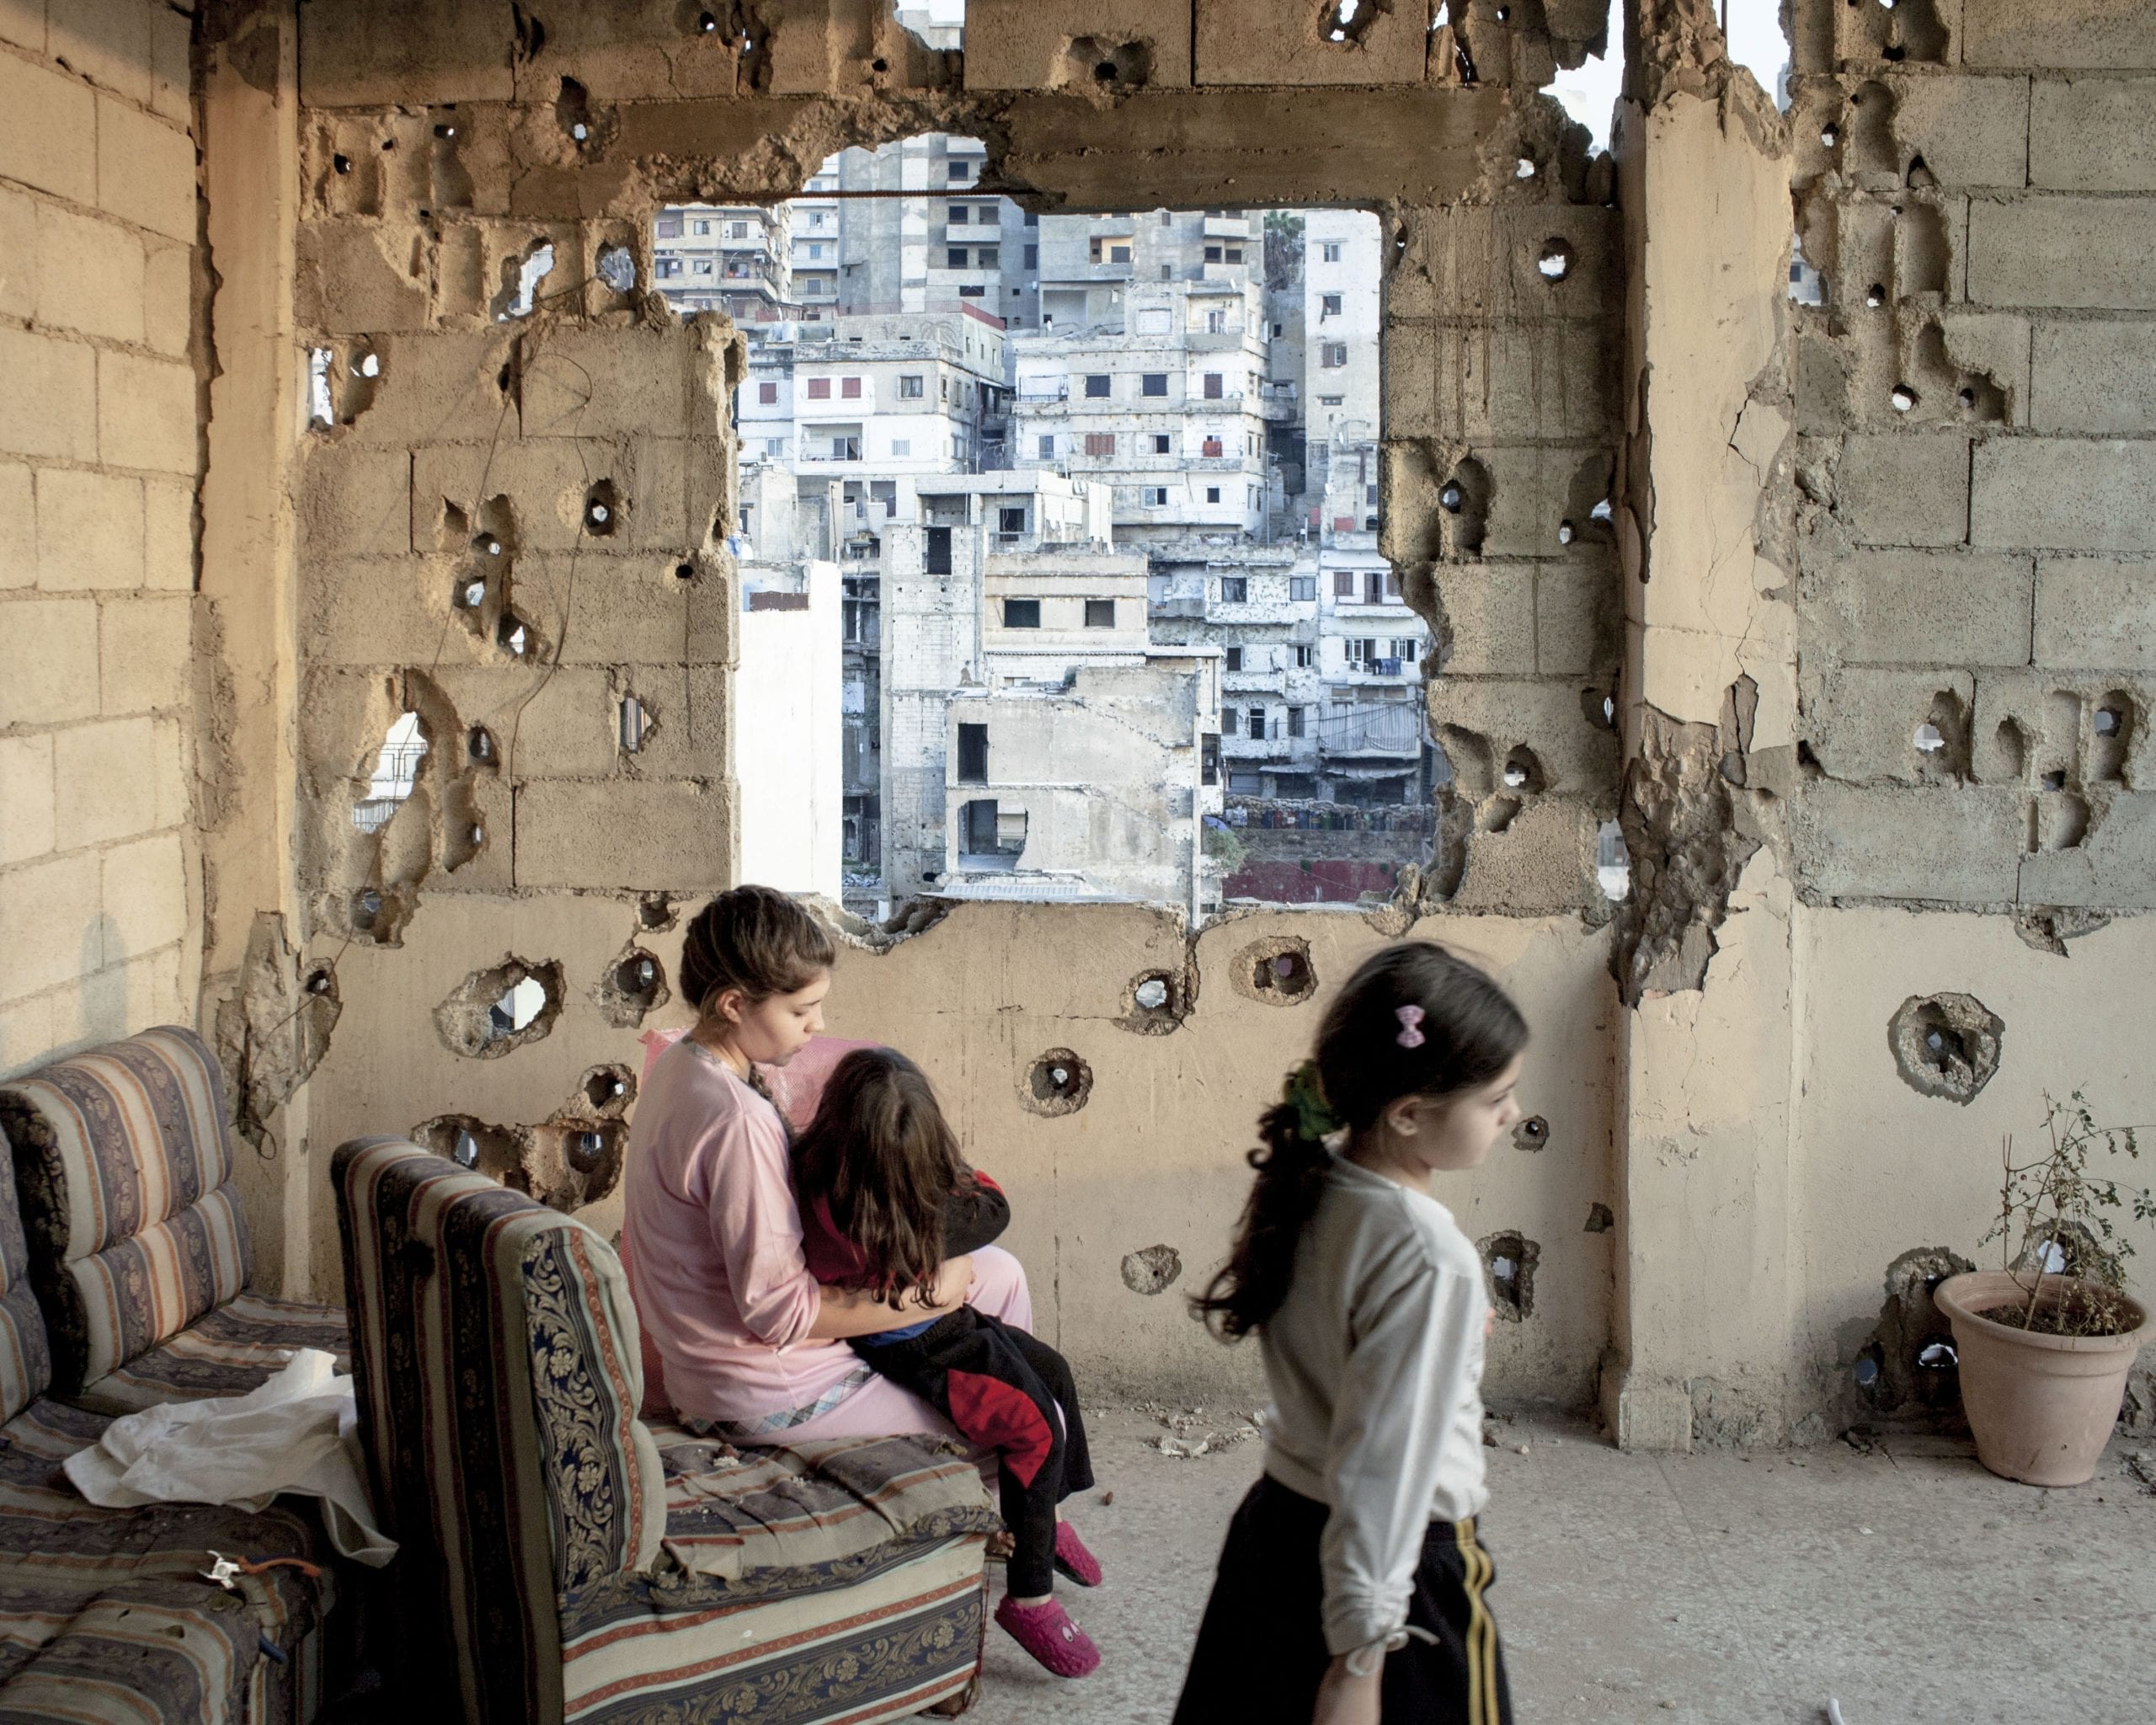 LEBANON. Tripoli. November 2013. Interior of an apartment on Syria Street destroyed by the fights, where the sectarian fights between Sunnis and Shiite are more violent.